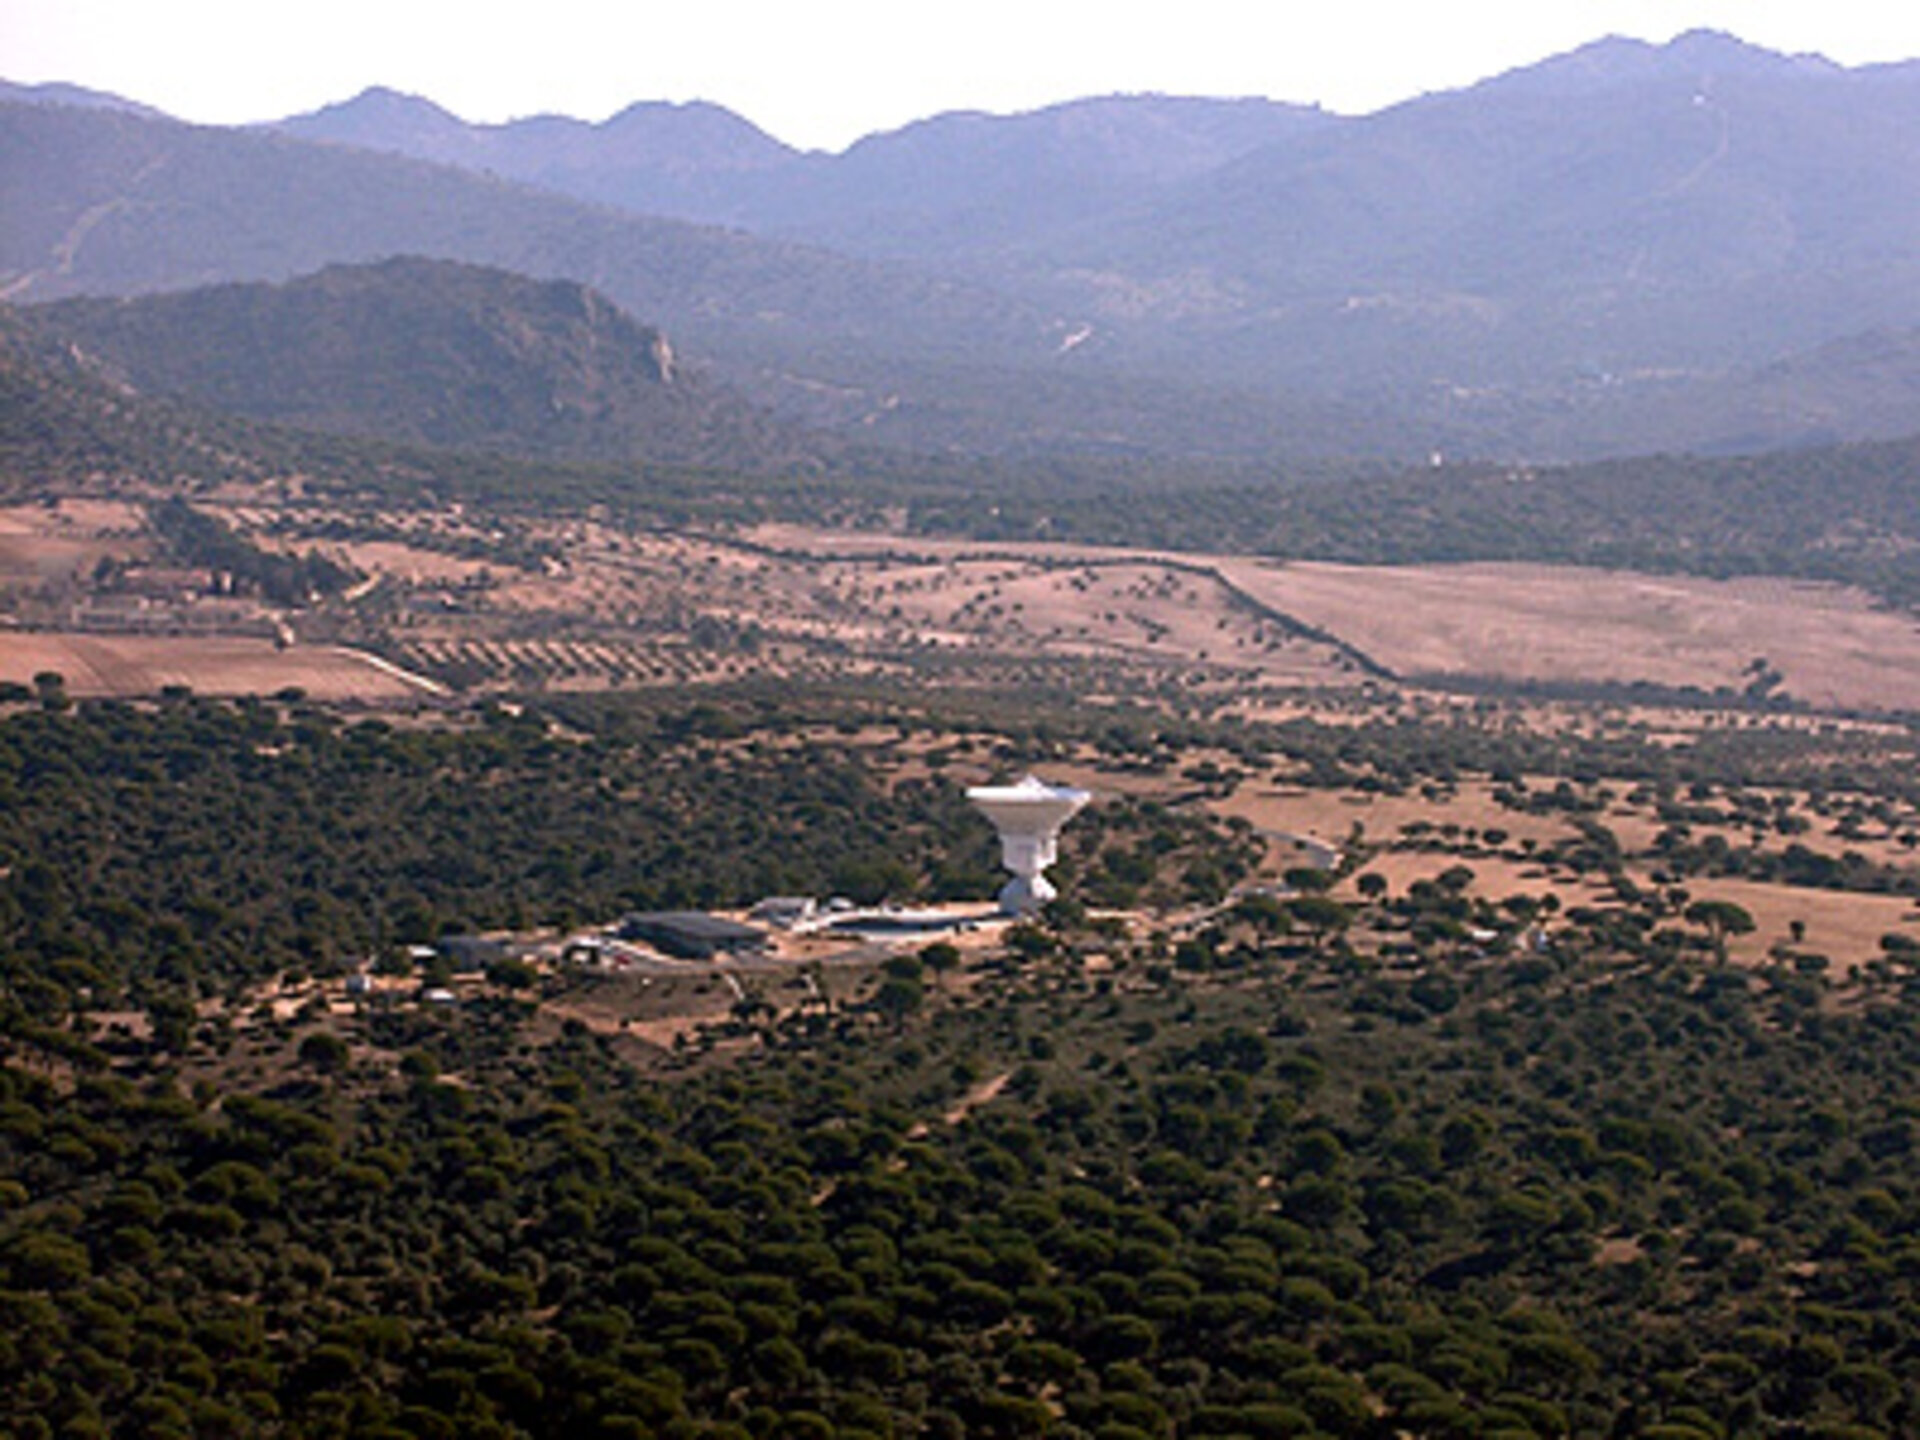 View of Cebreros site from collimation tower